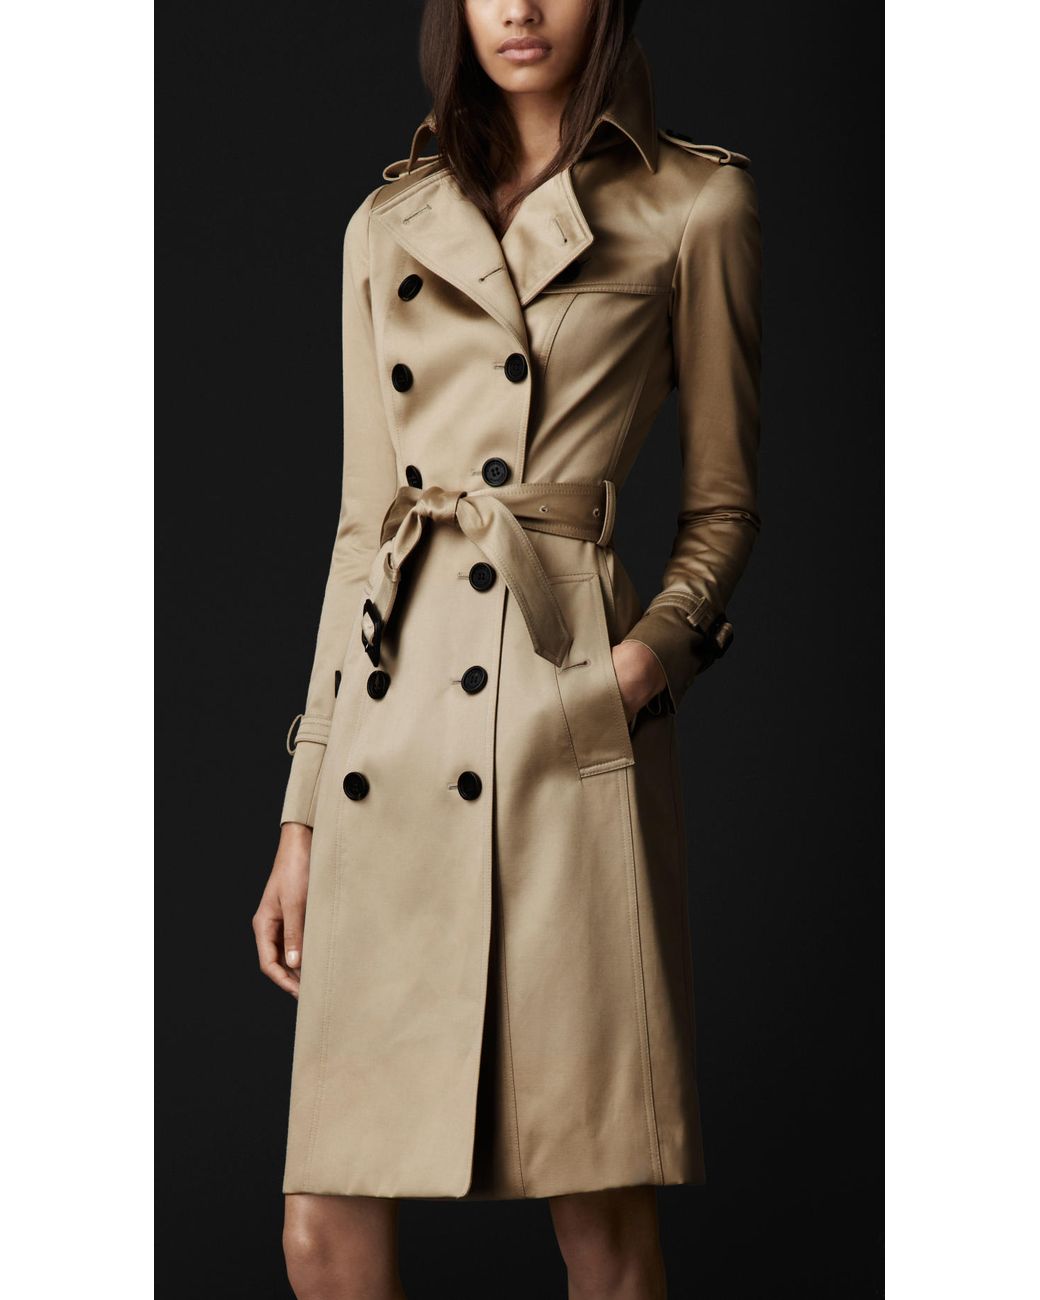 Burberry Prorsum Long Cotton Sateen Trench Coat in Natural | Lyst